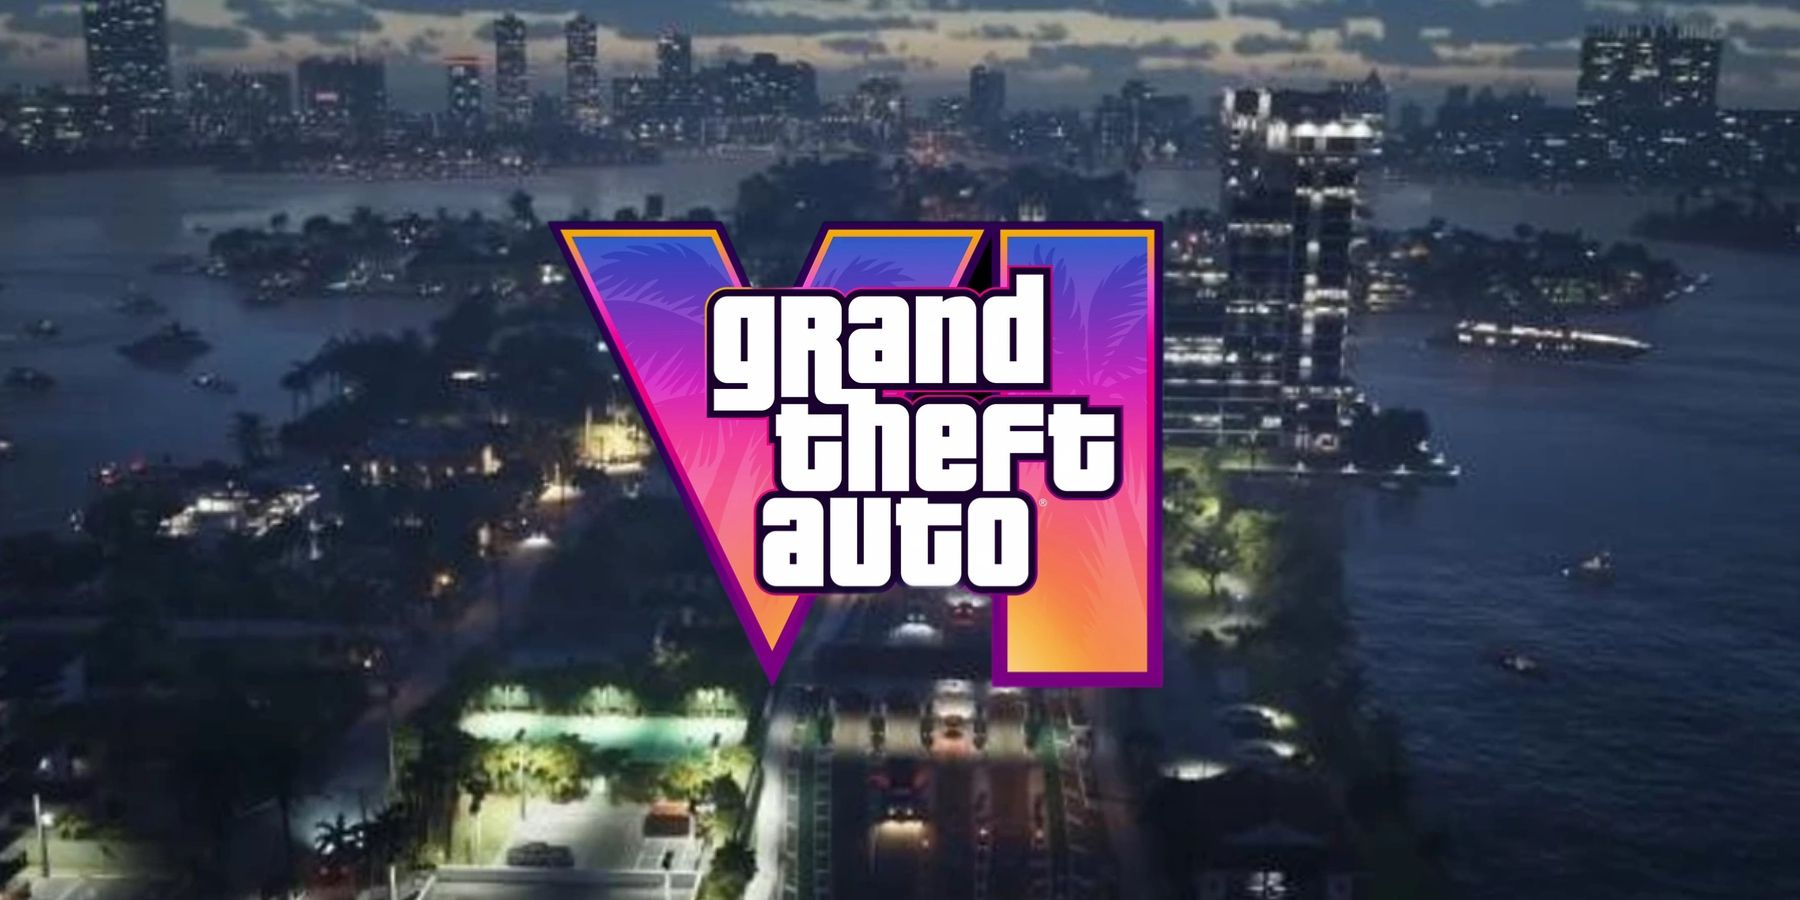 every animal confirmed for grand theft auto 6 so far